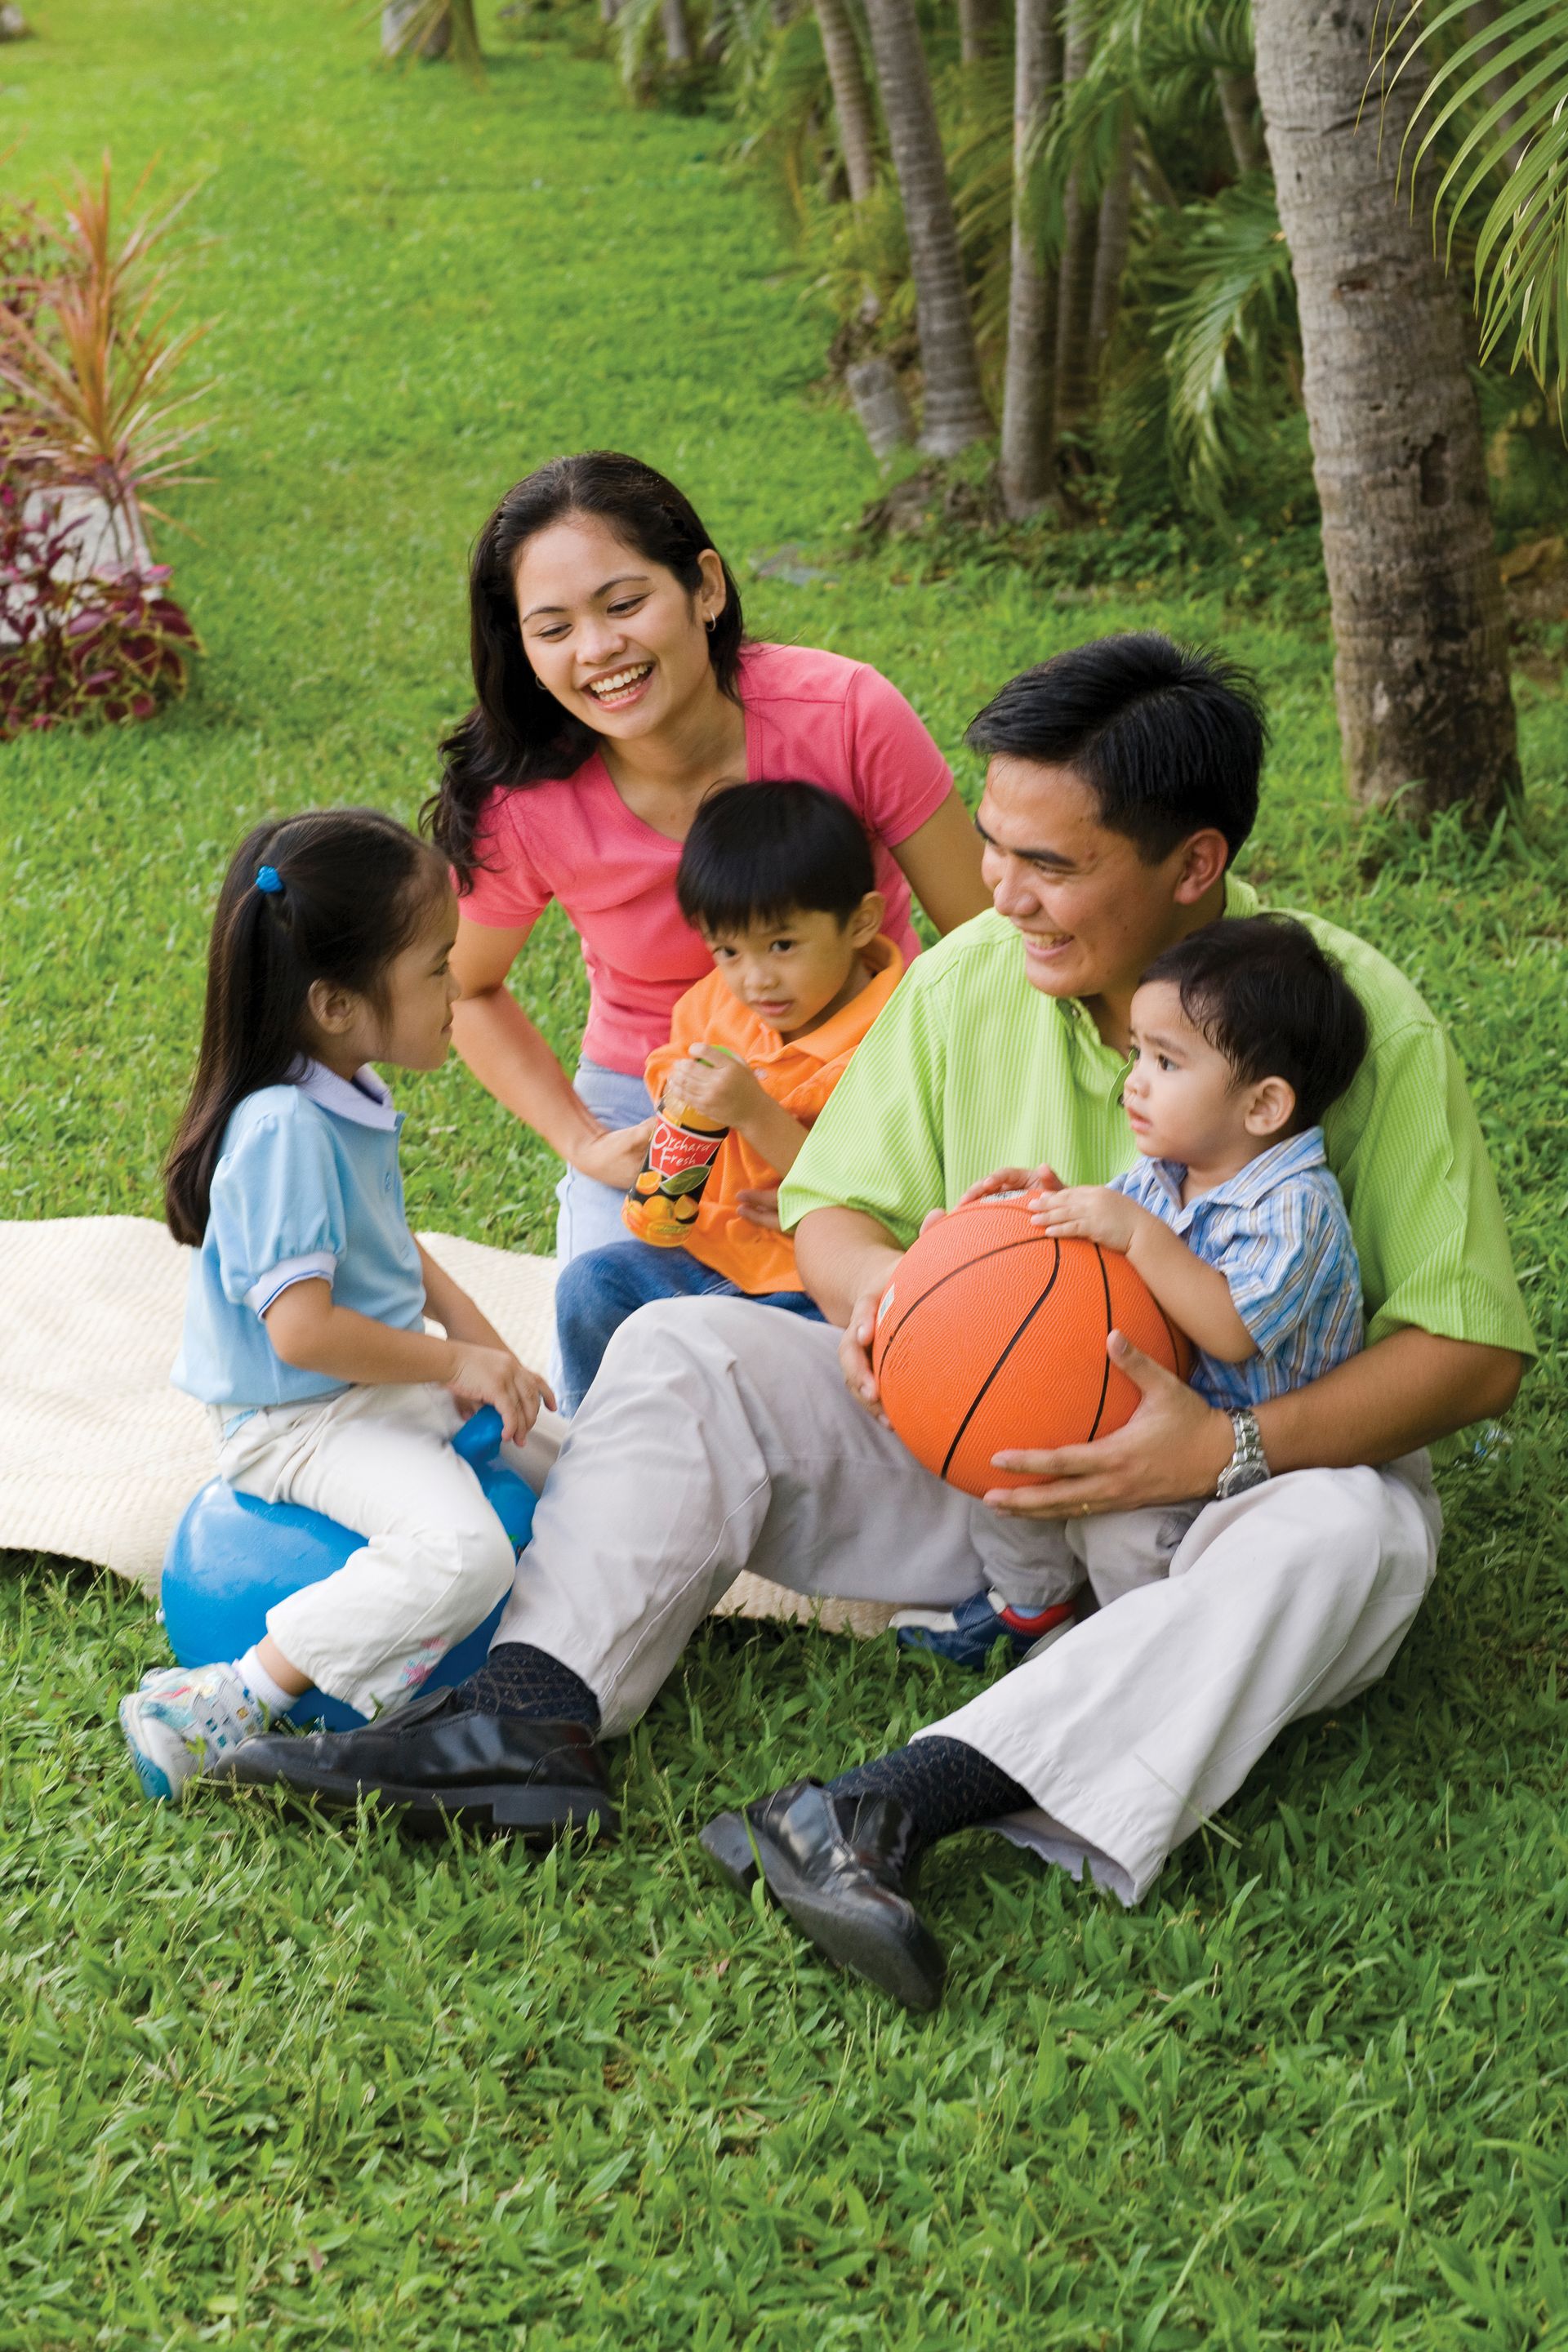 A family playing with a basketball together.